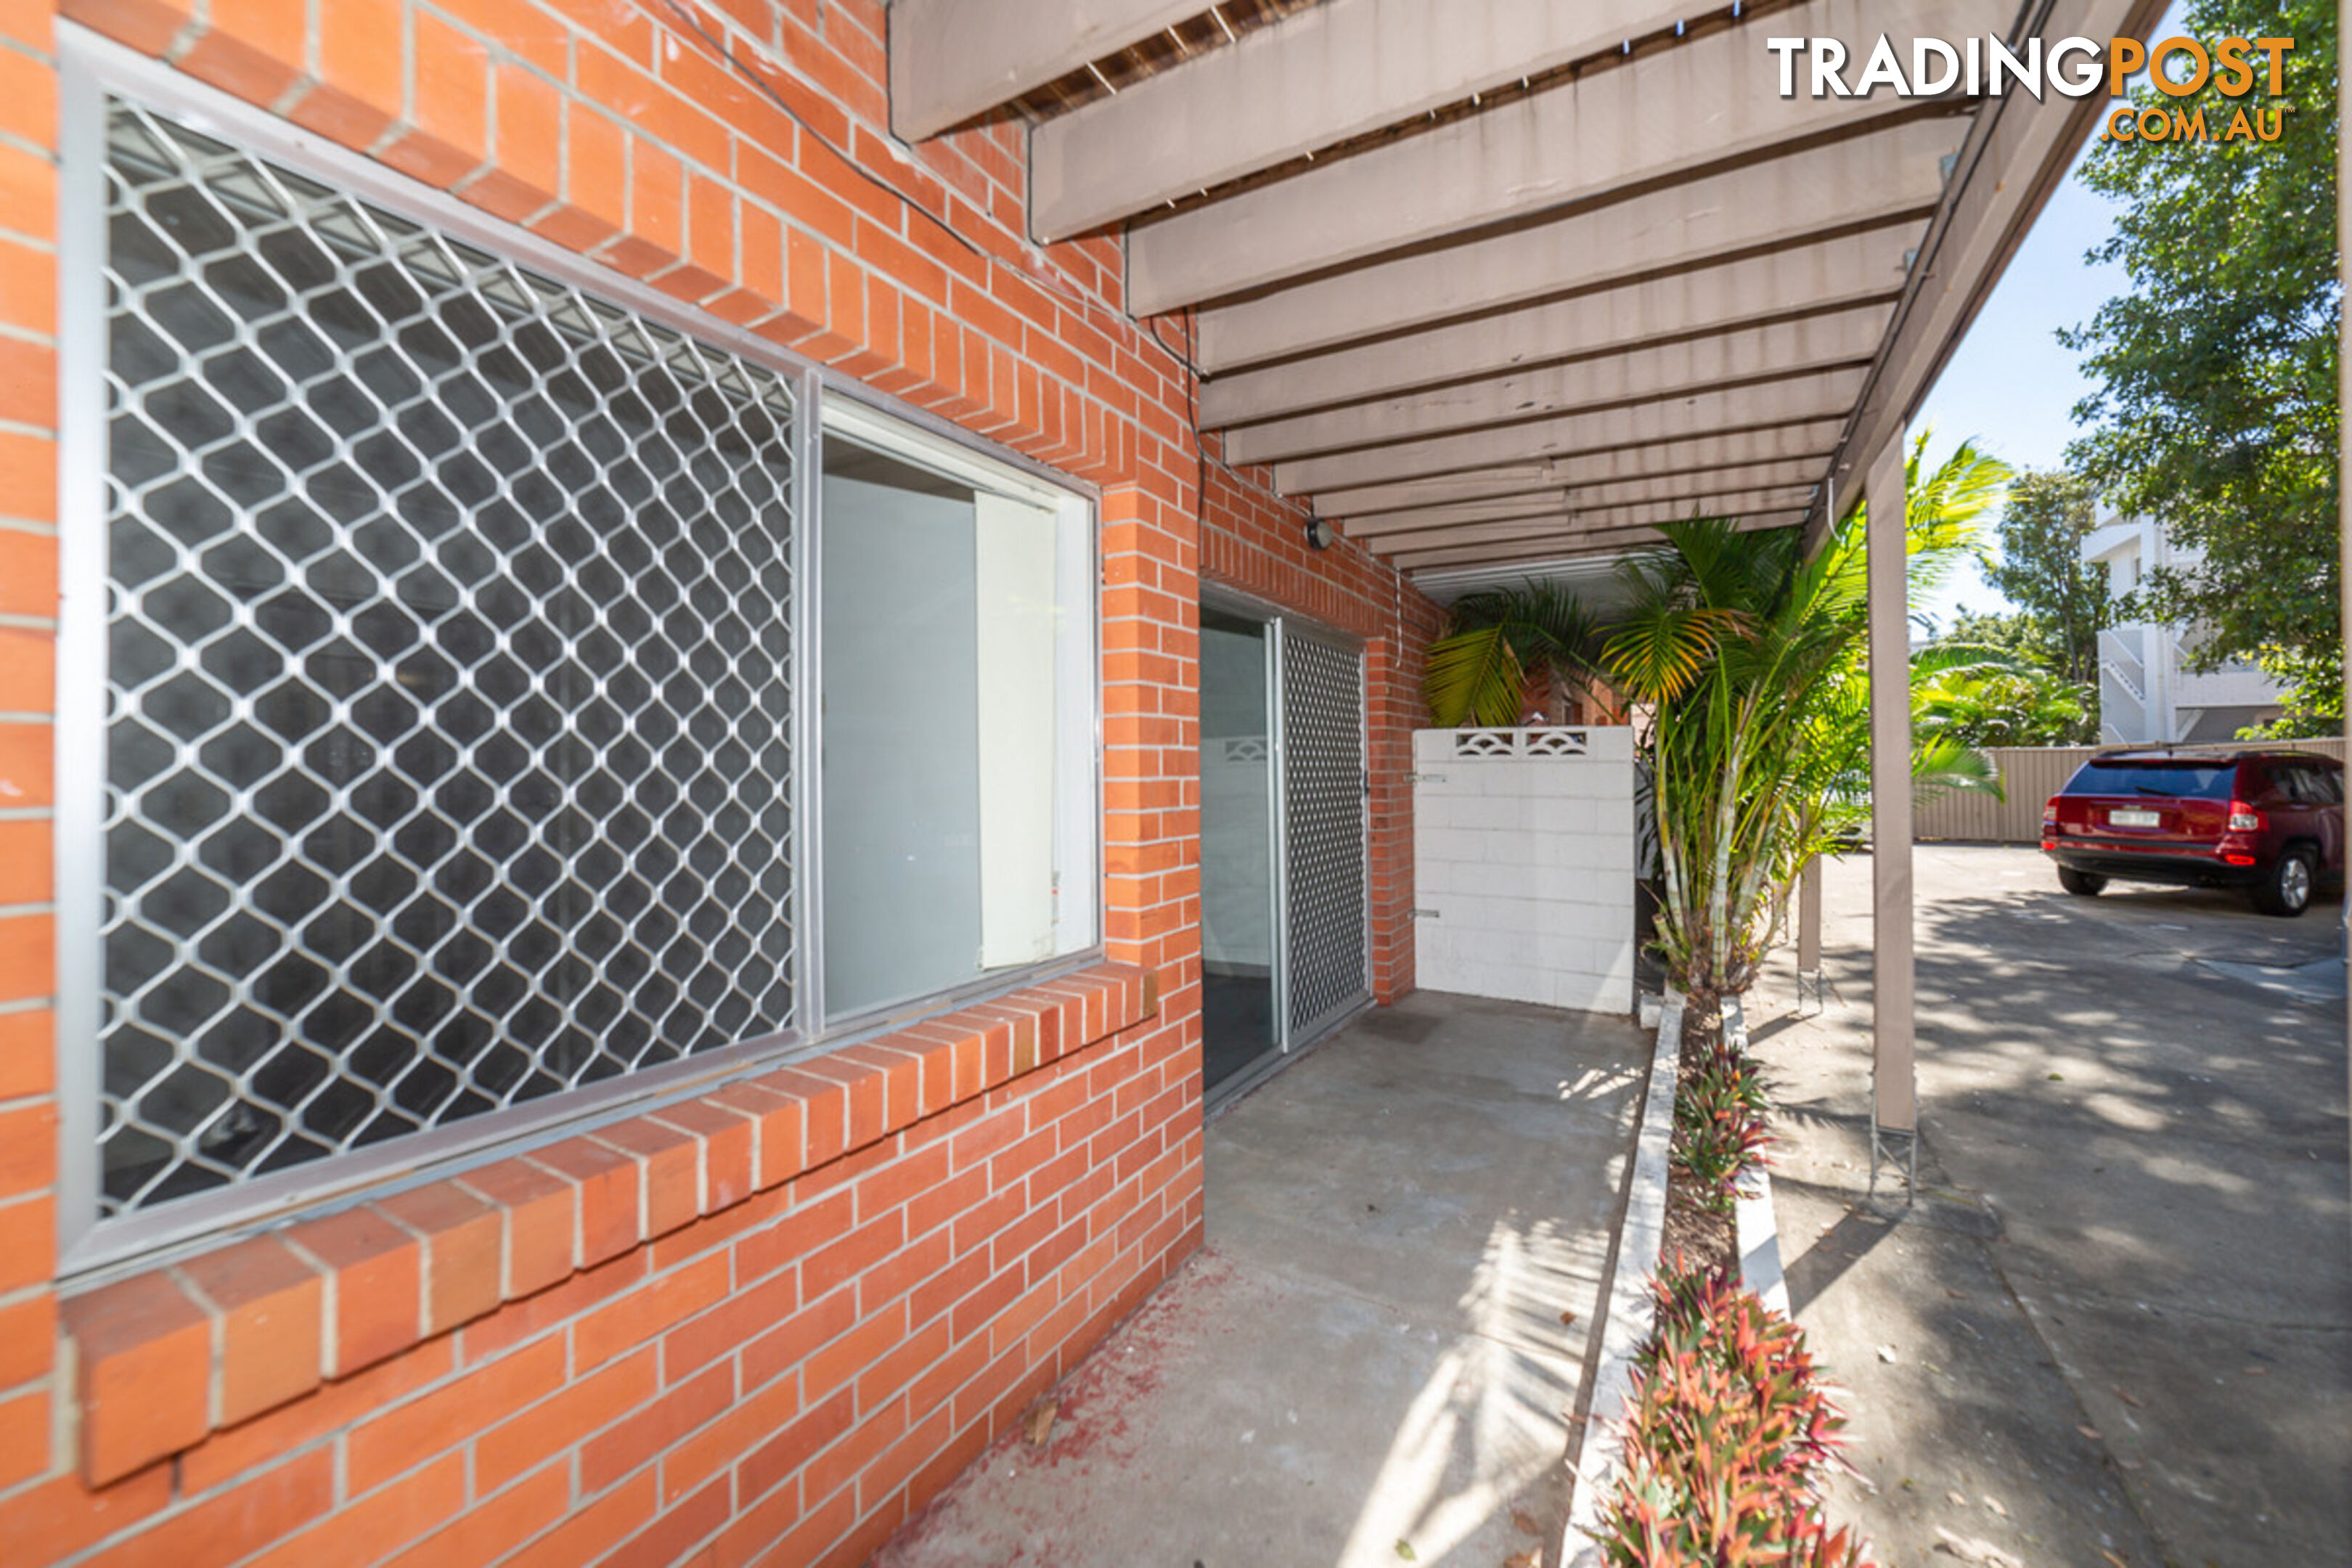 2/5 North Street SOUTHPORT QLD 4215